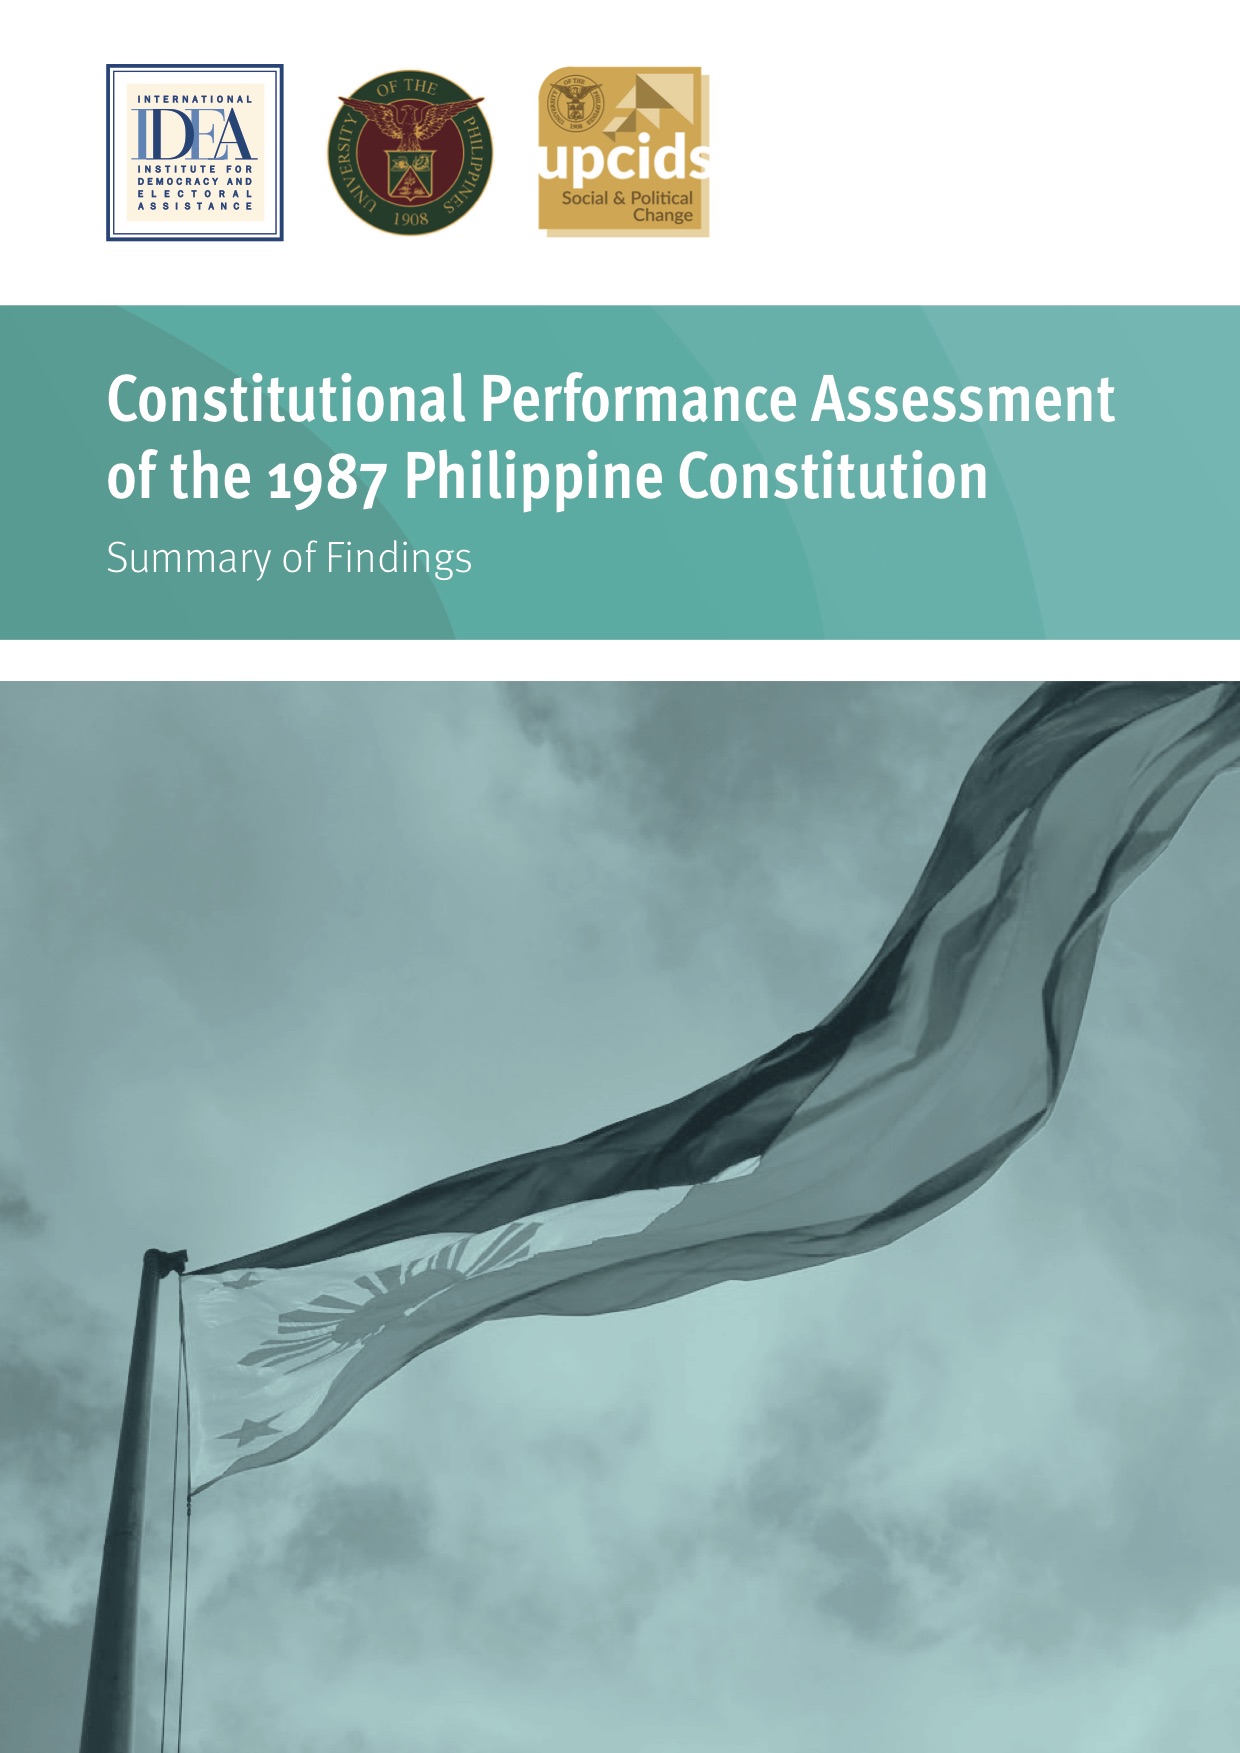 Constitutional Performance Assessment of the 1987 Philippine Constitution